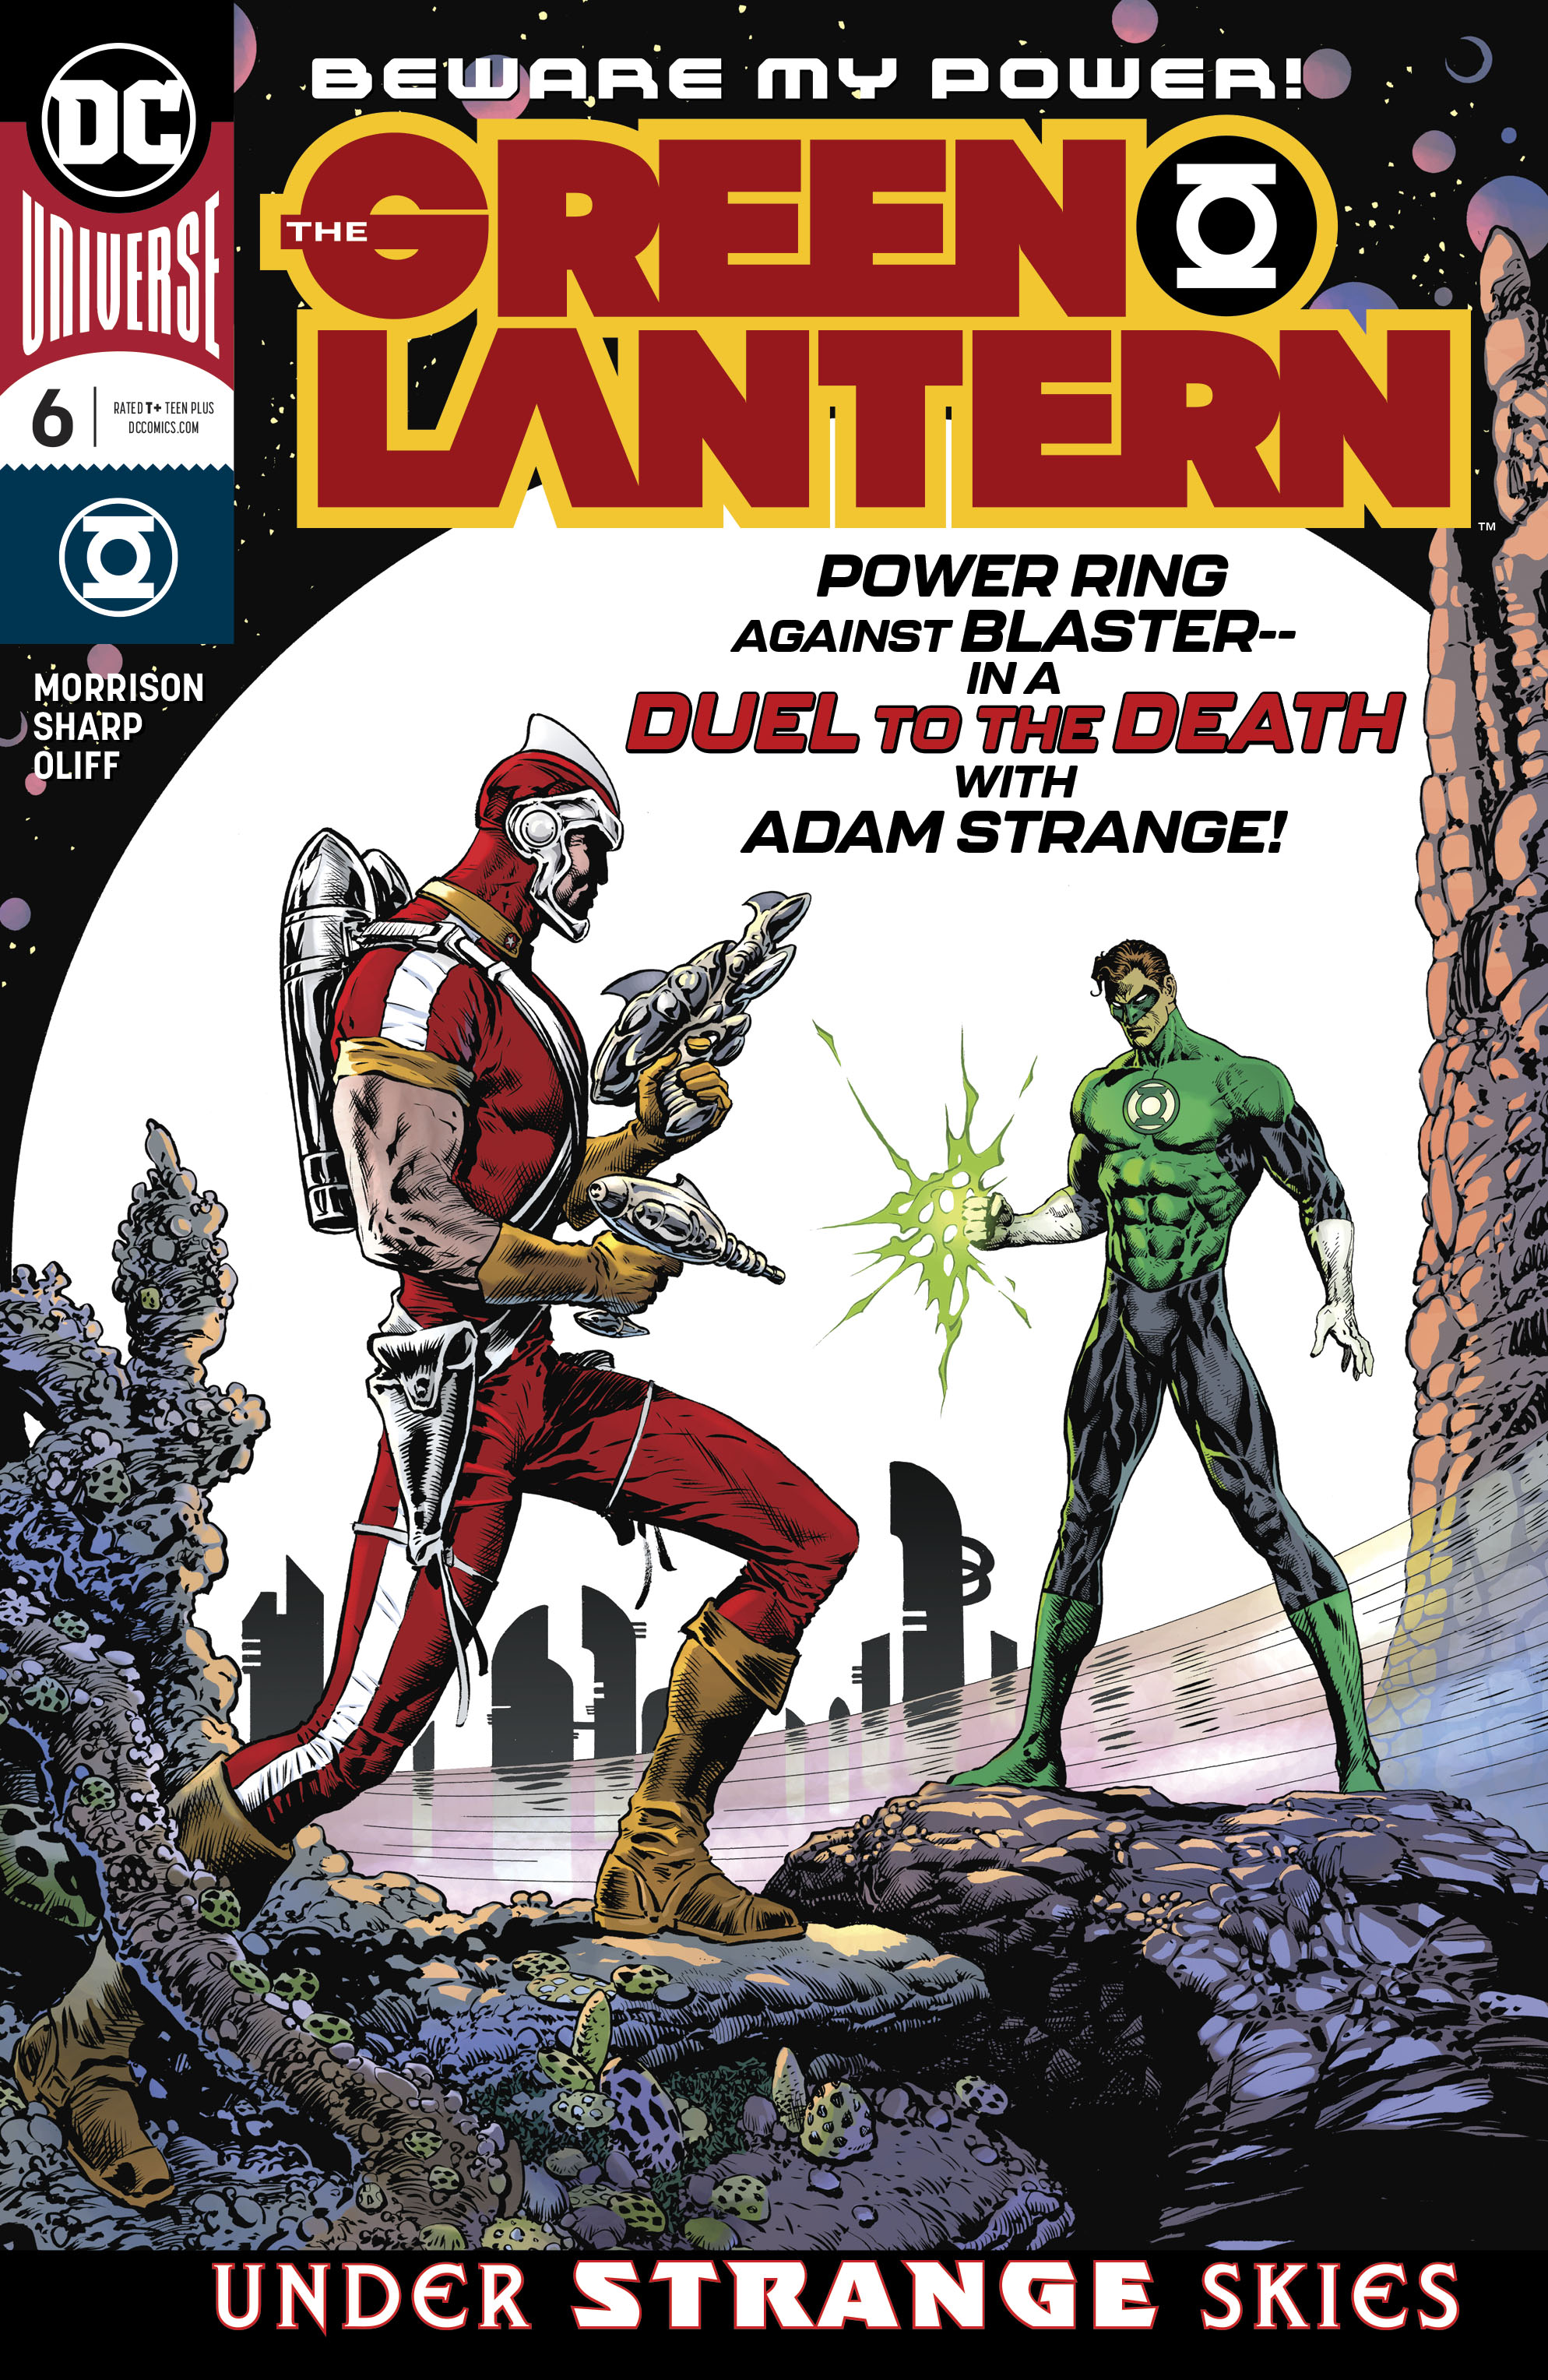 Read online The Green Lantern comic -  Issue #6 - 1